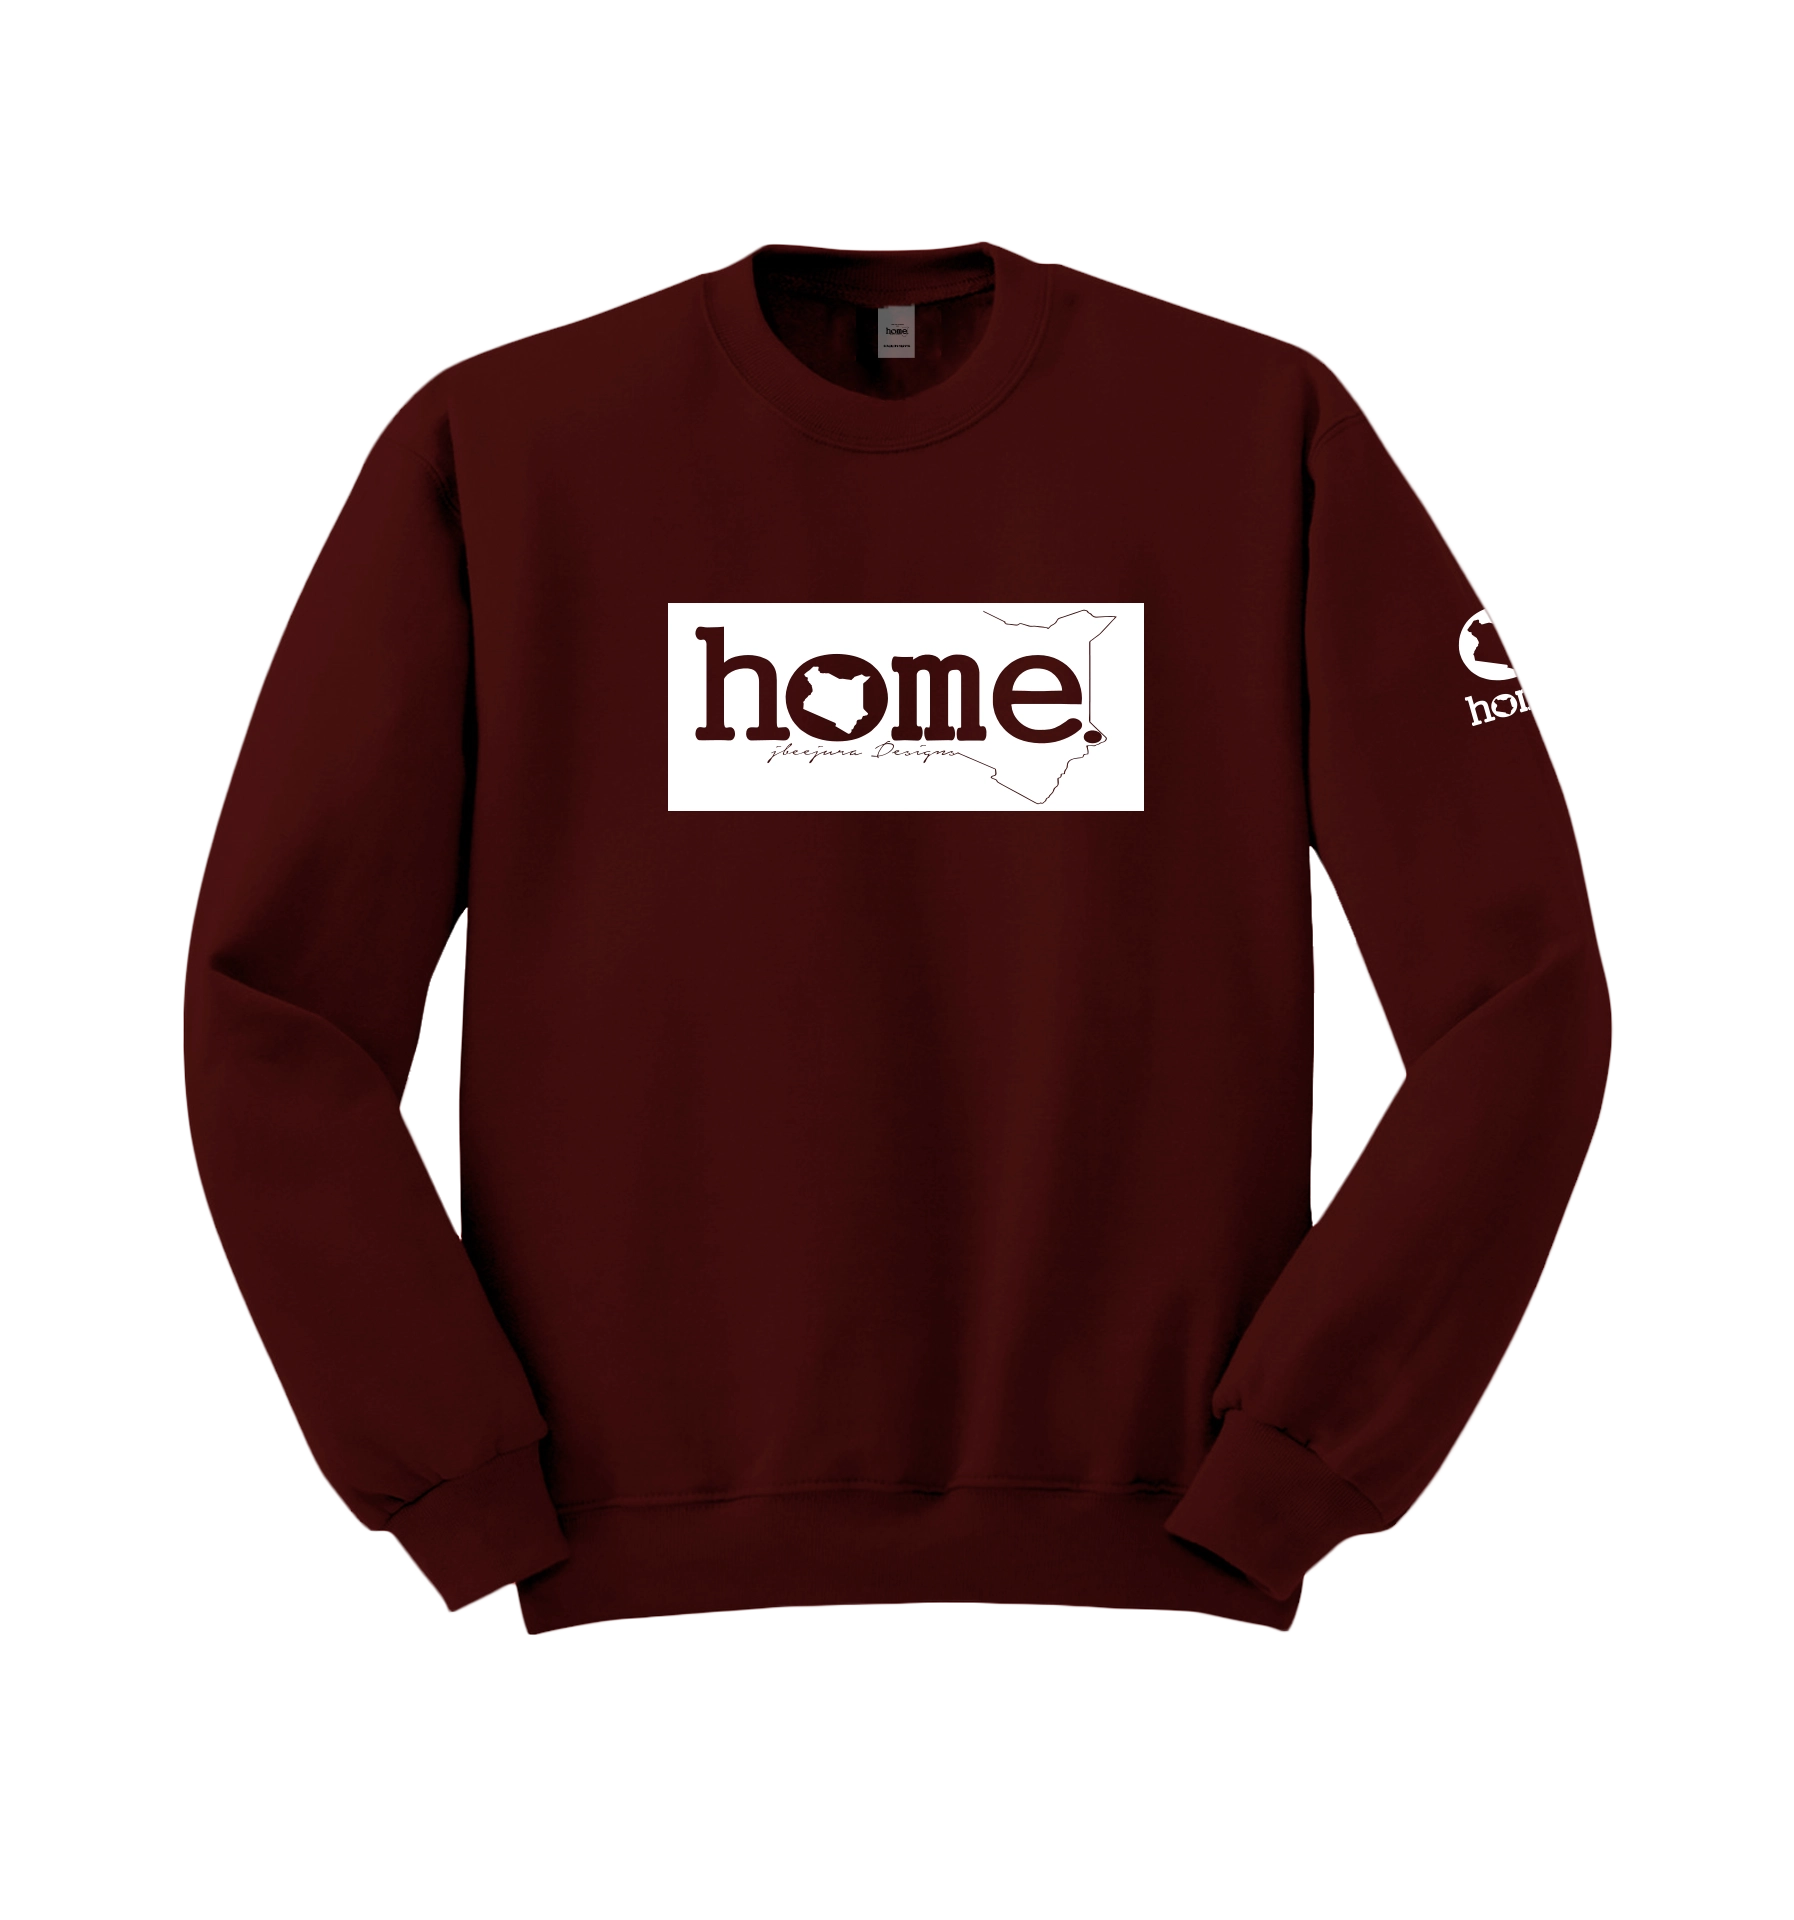 home_254 MAROON SWEATSHIRT (HEAVY FABRIC) WITH A WHITE CLASSIC PRINT